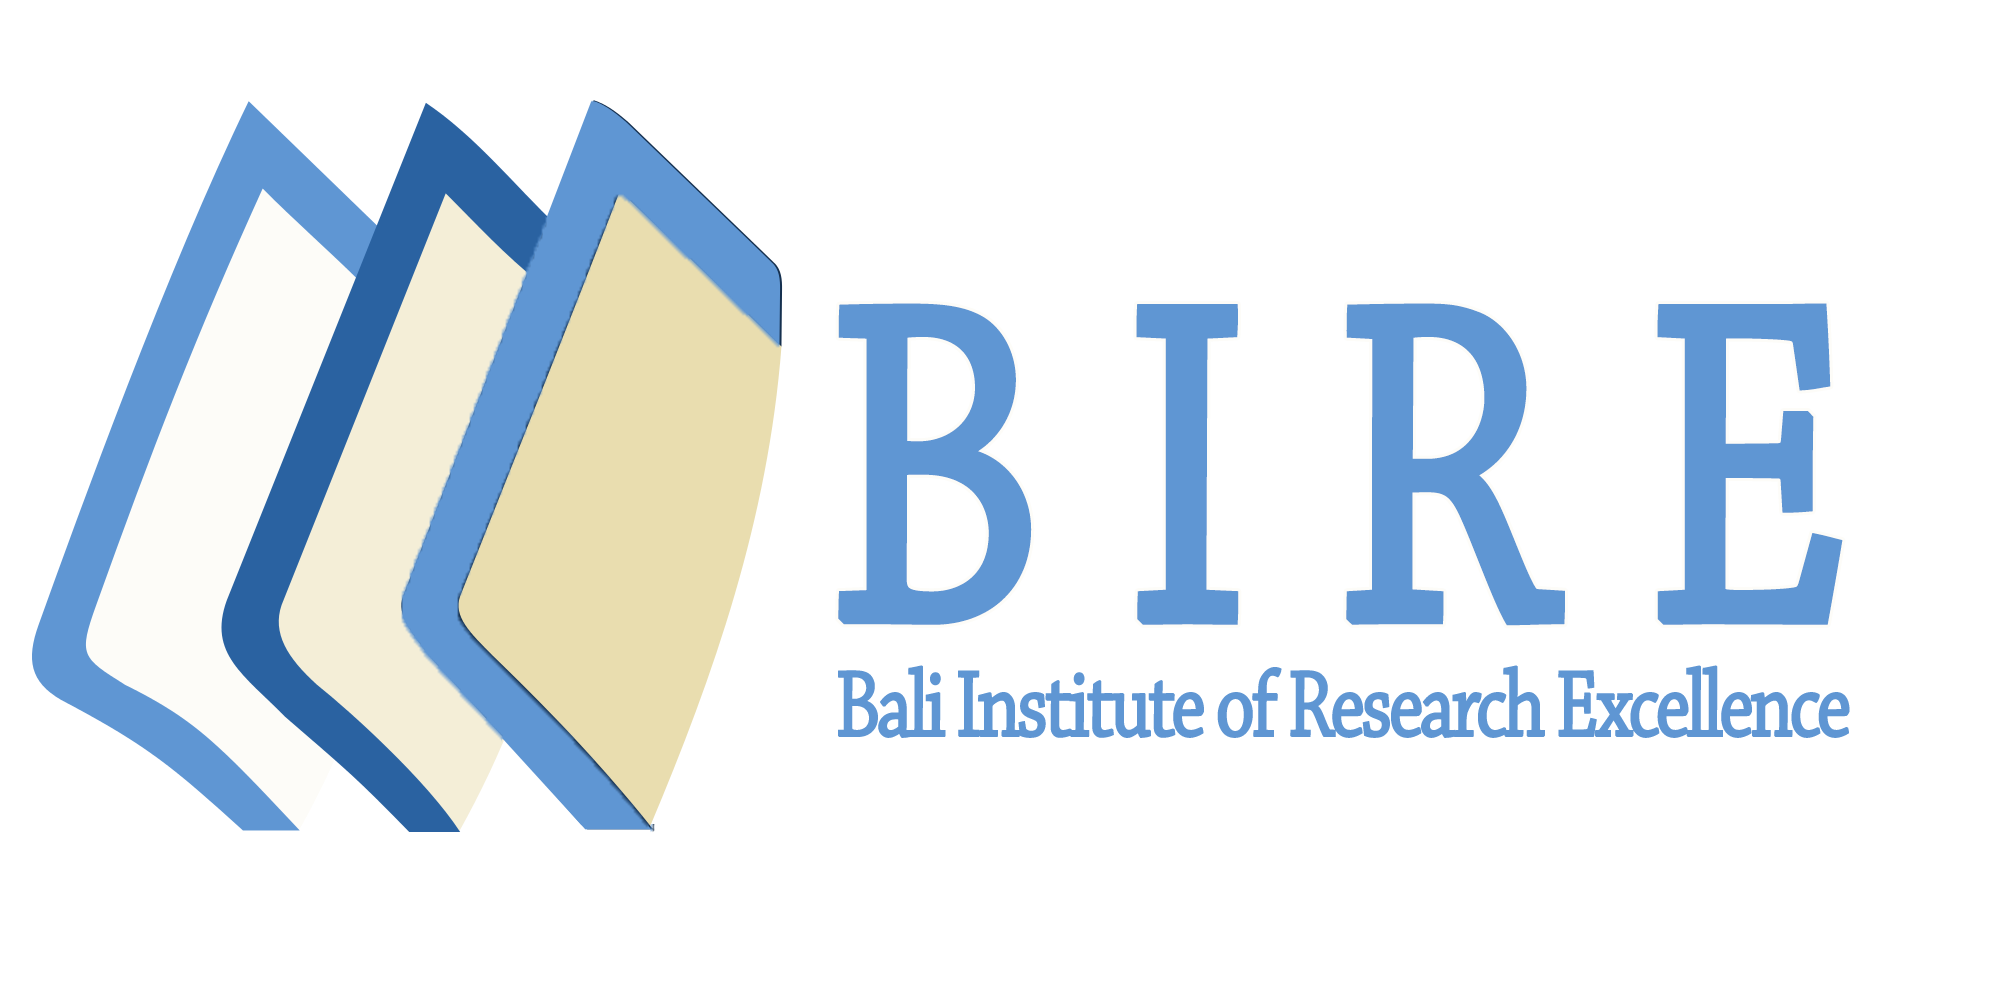 MEIT-2023 5th International Conference on Management Study, Business Economics, Engineering and Information Technology, Badung, Bali, Indonesia